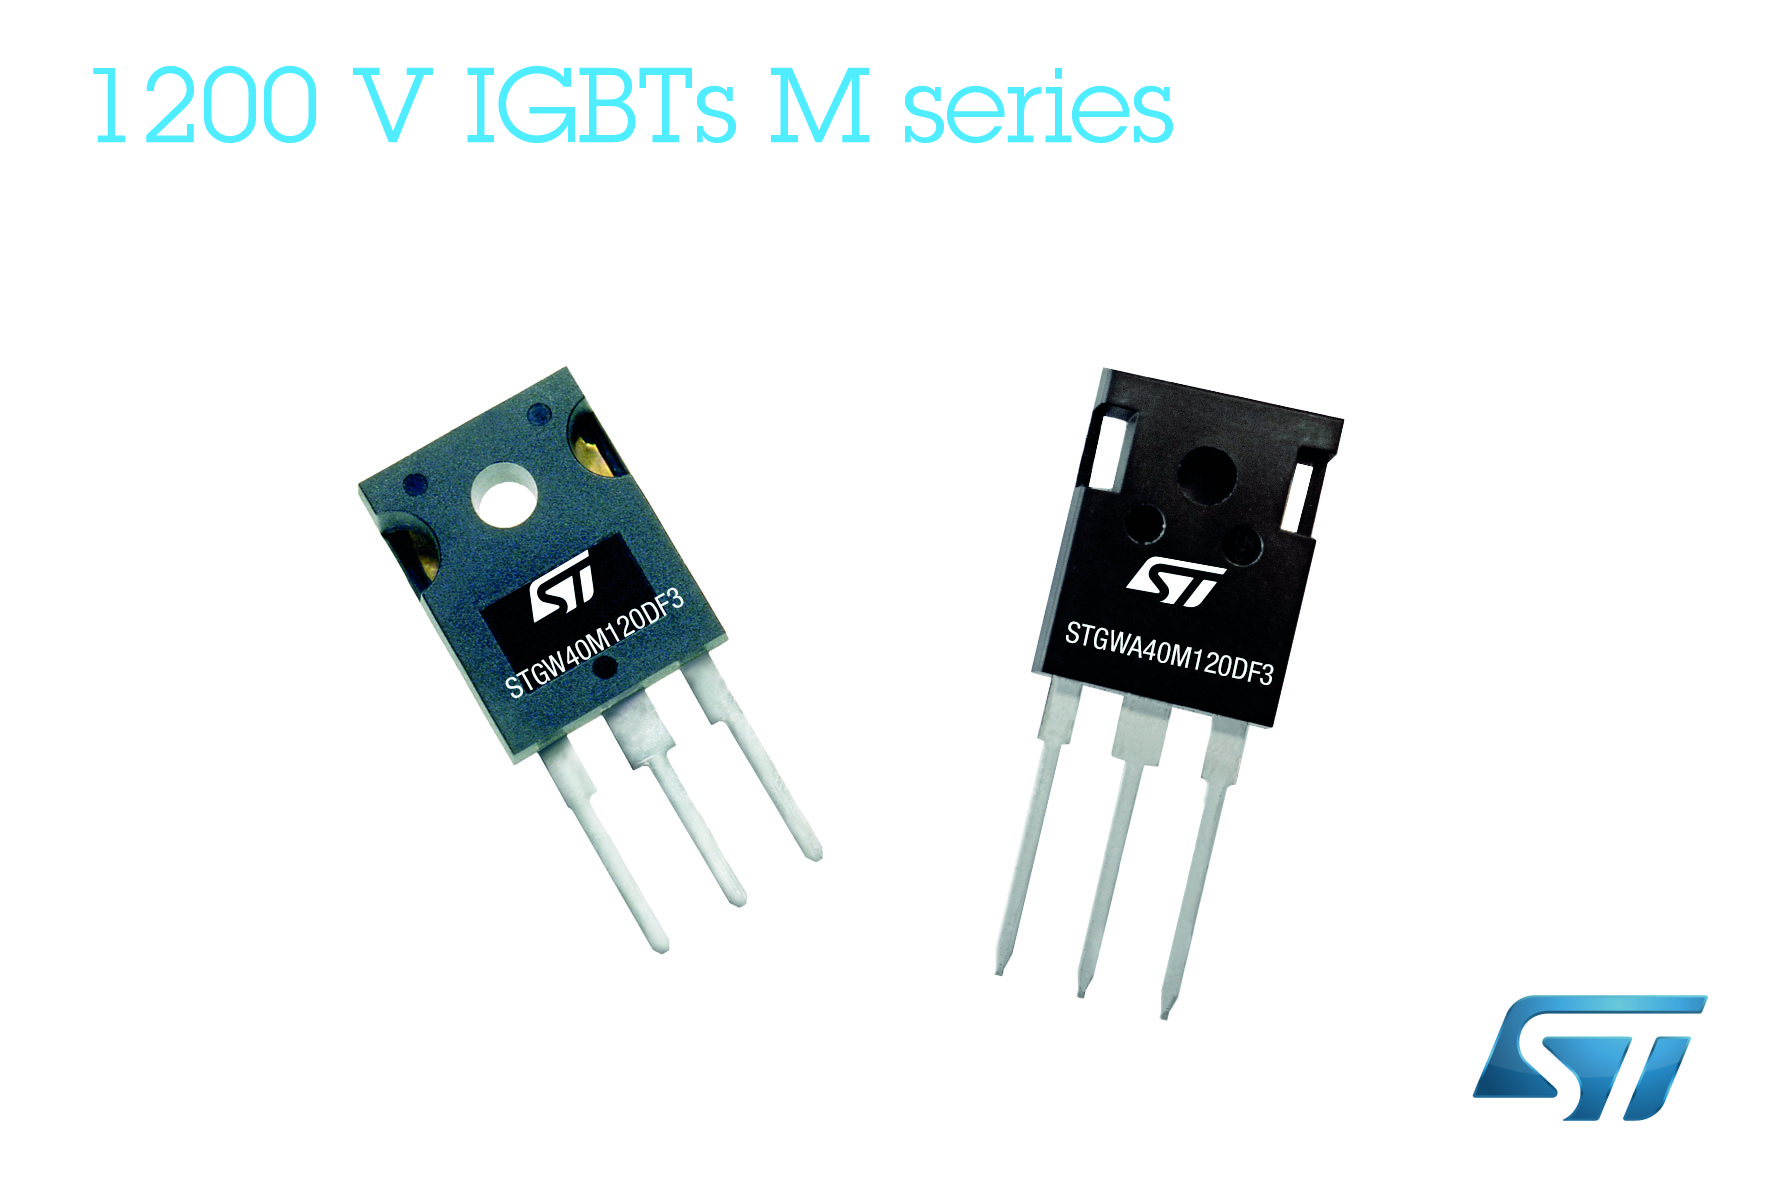 M-Series IGBTs from STMicro tout efficiency and ruggedness